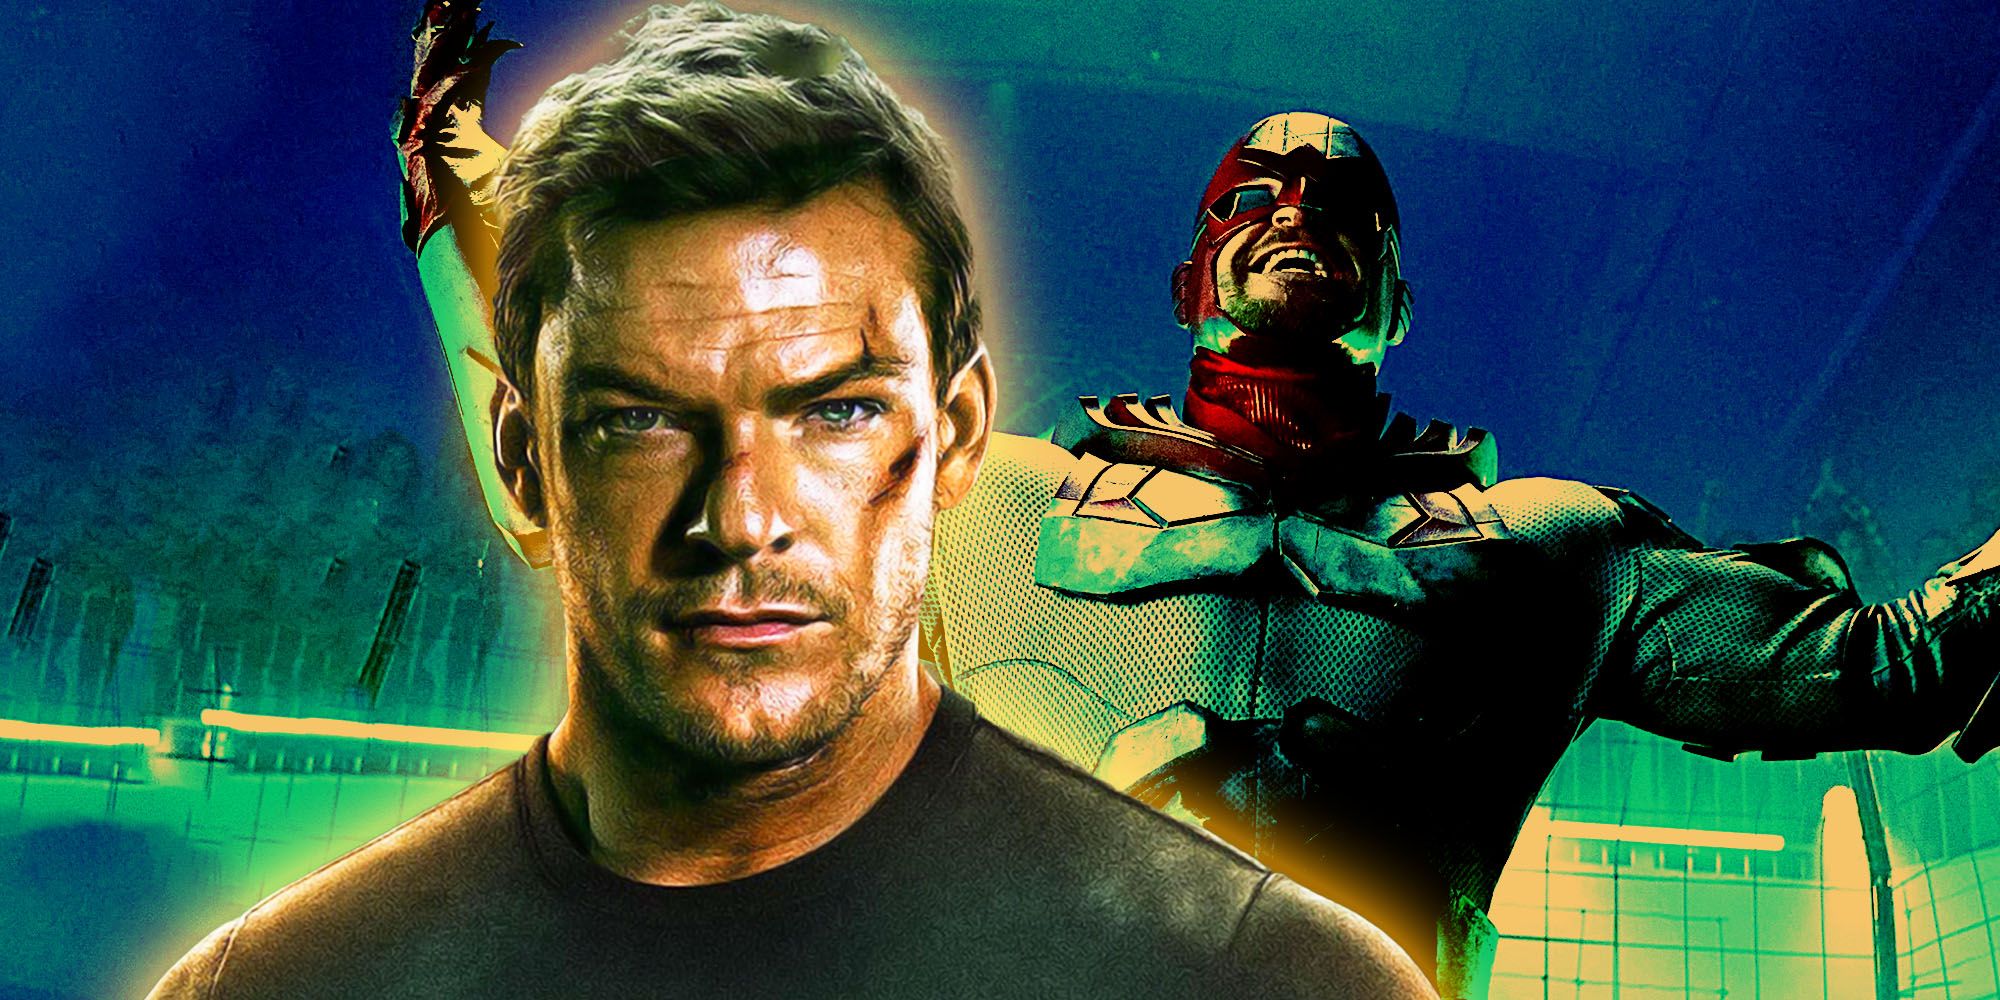 Split image of Alan Ritchson as Jack Reacher and Hawk in Titans